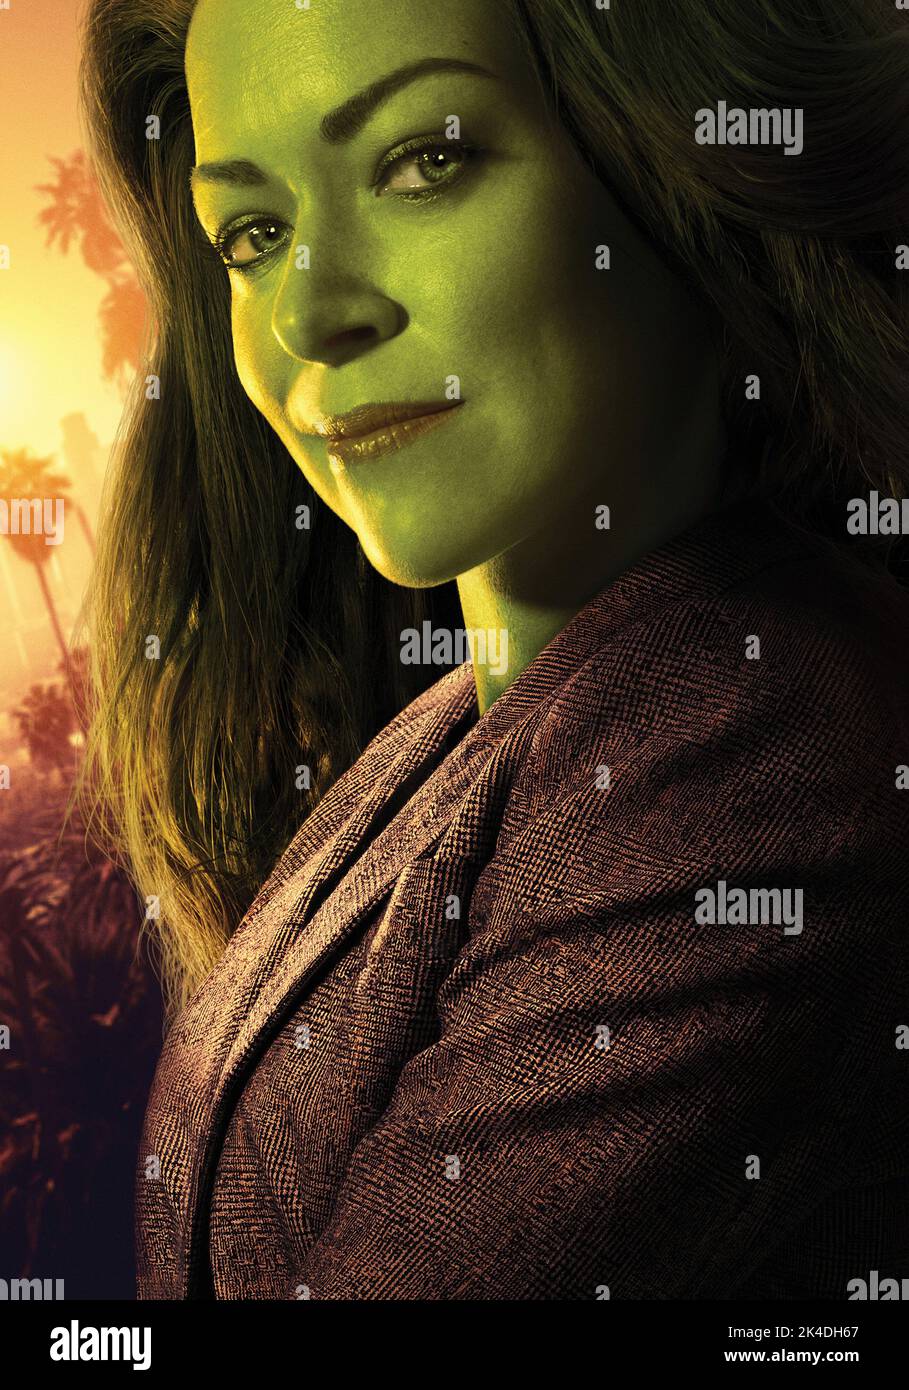 TATIANA MASLANY in SHE-HULK: ATTORNEY AT LAW (2022), directed by KAT COIRO and JESSICA GAO. Credit: MARVEL STUDIOS / Album Stock Photo